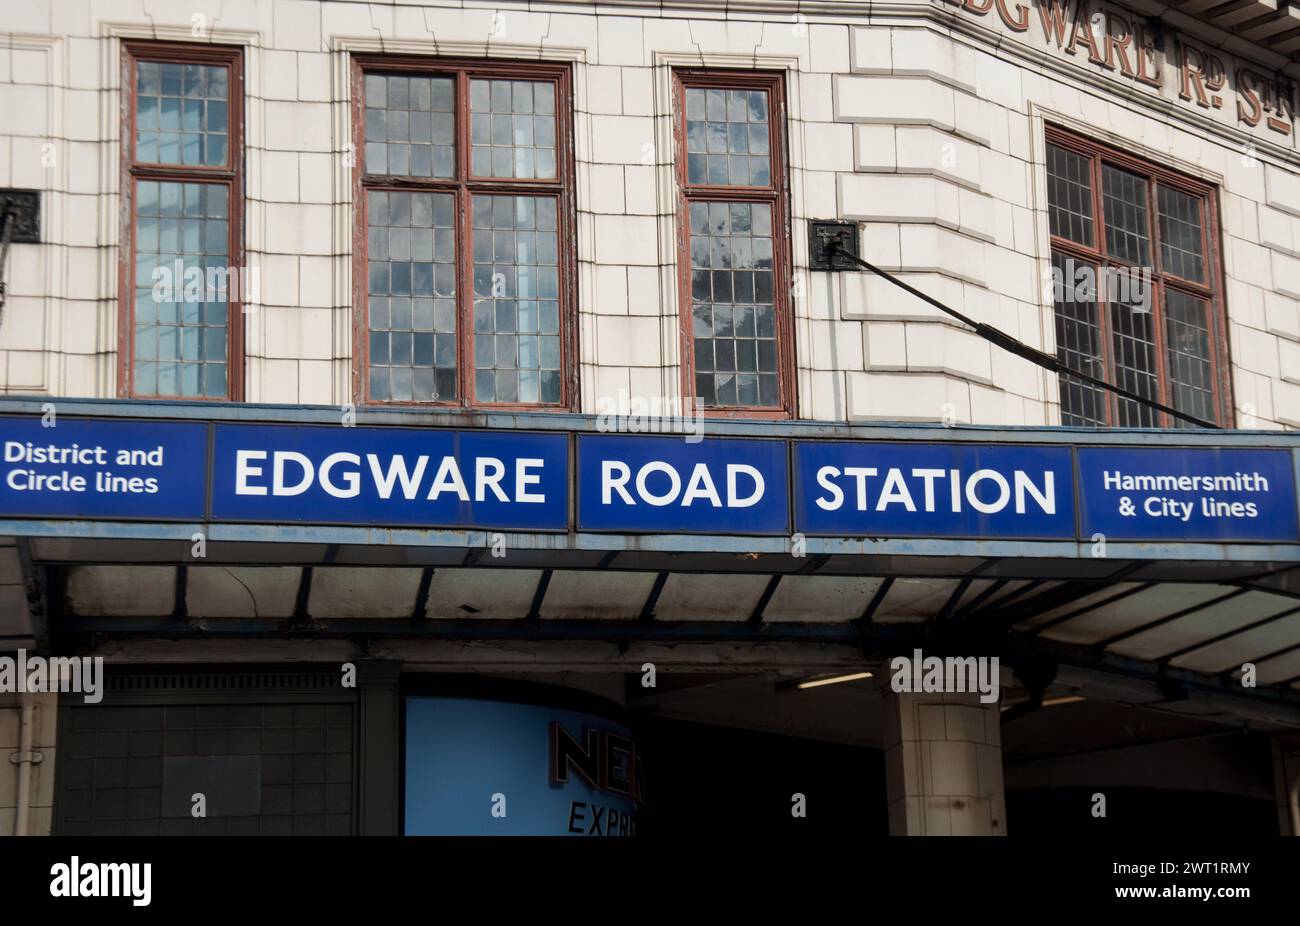 Edgware Road is a London Underground station on the Circle, District and Hammersmith & City lines, located on the corner of Chapel Street and Cabbell Stock Photo